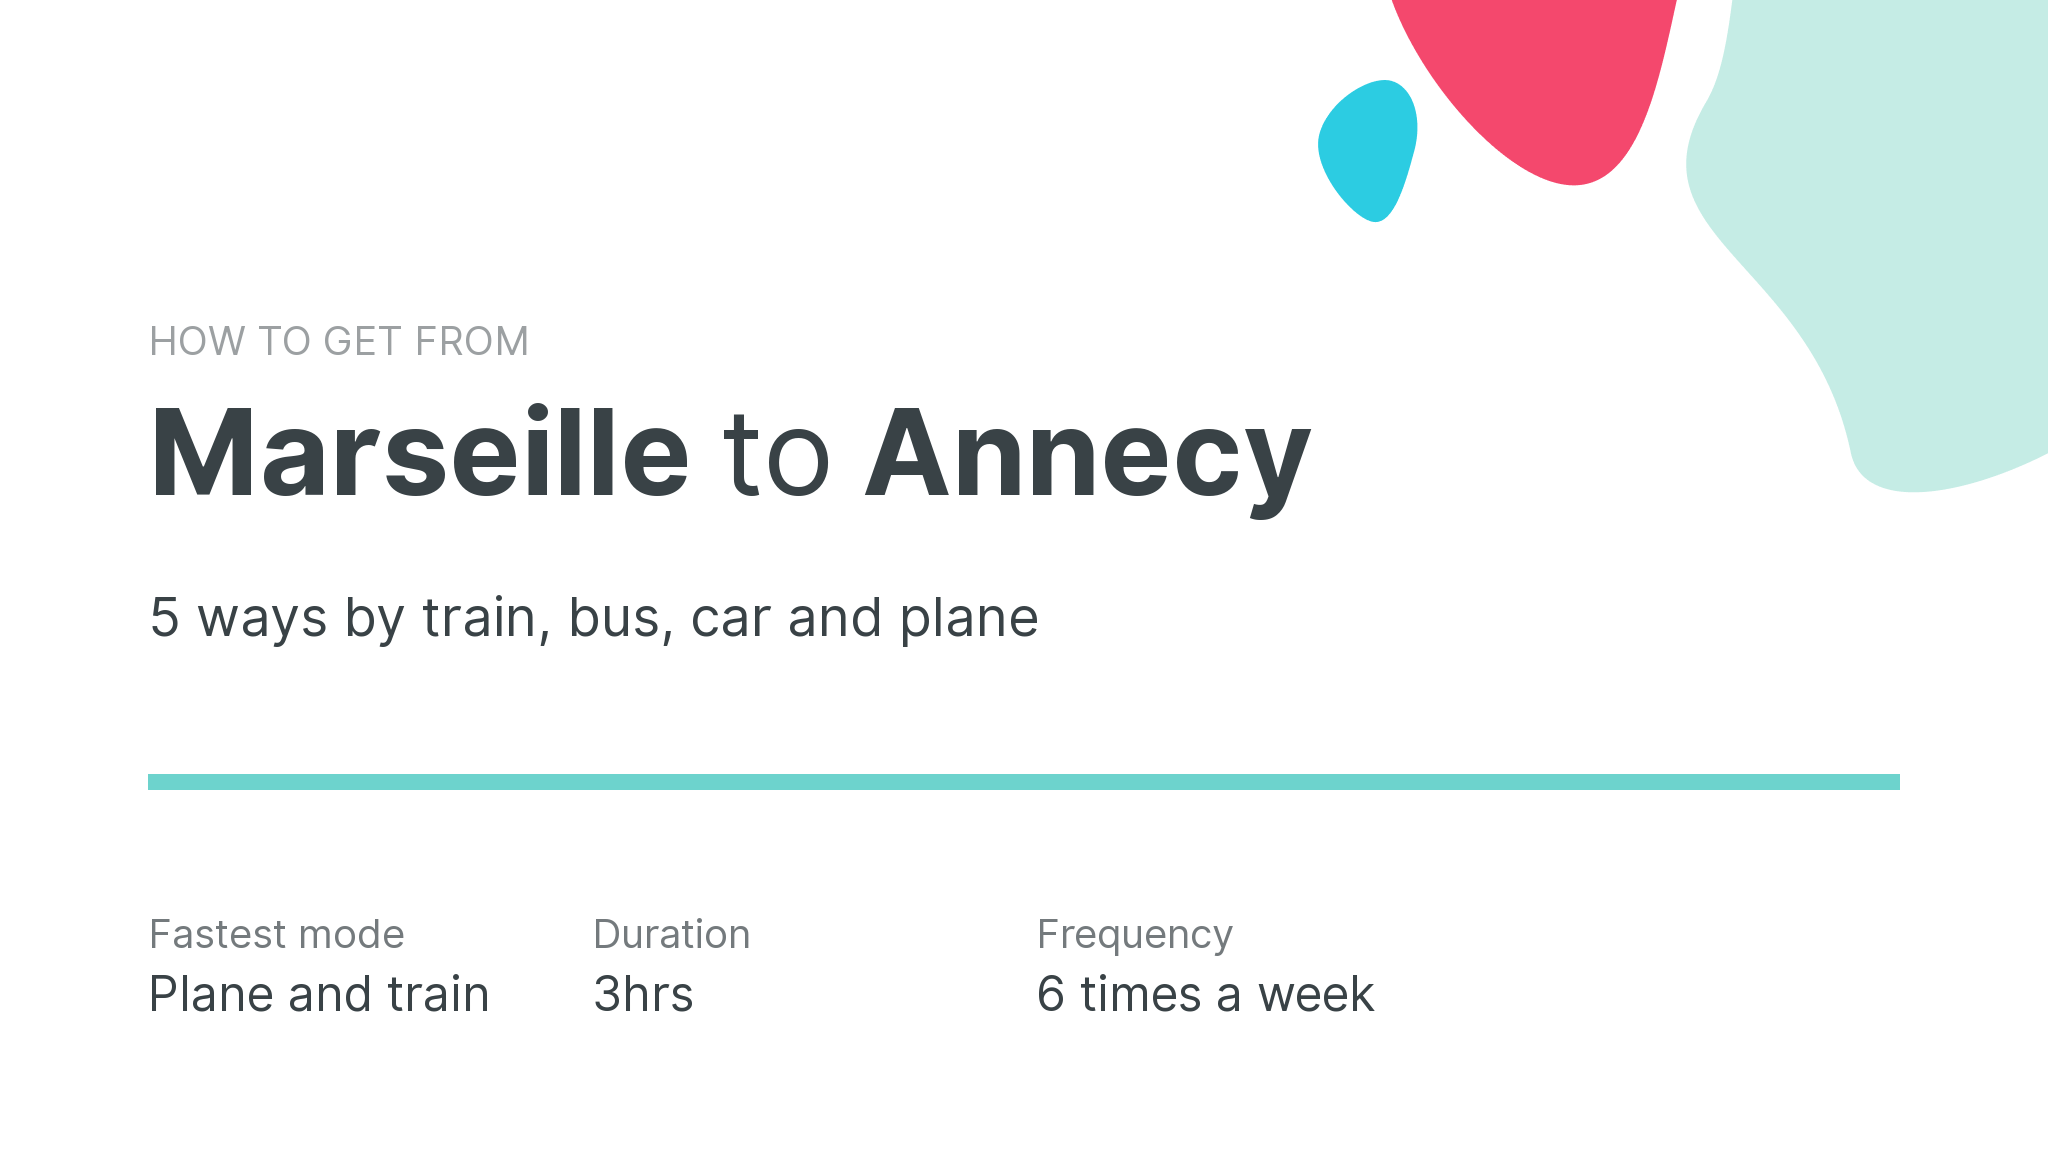 How do I get from Marseille to Annecy